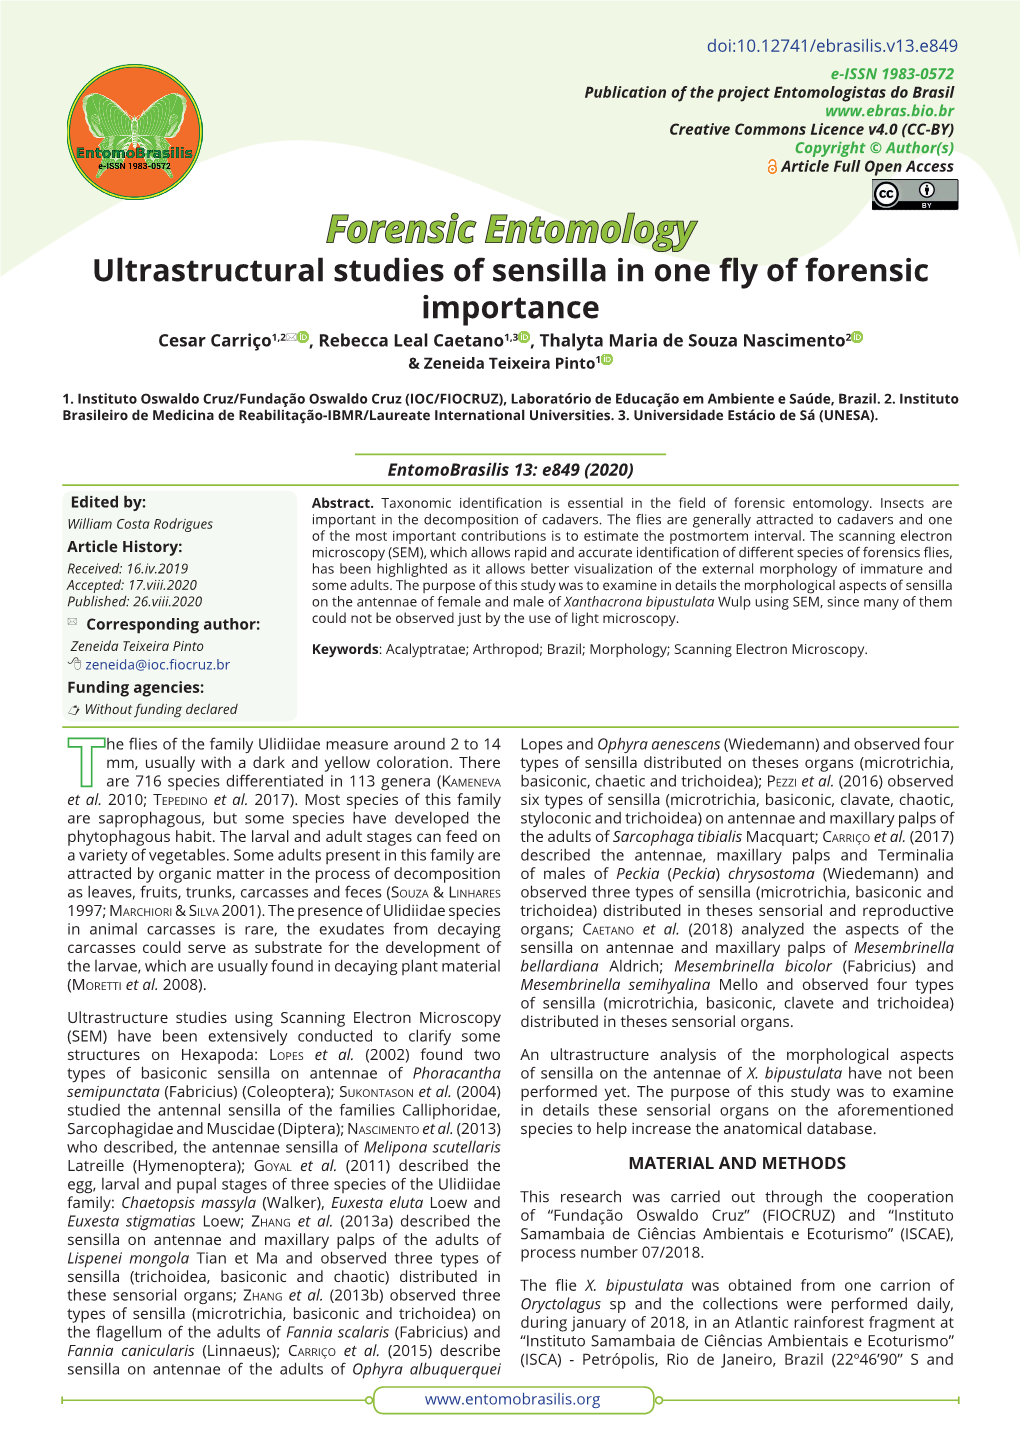 Ultrastructural Studies of Sensilla in One Fly of Forensic Importance